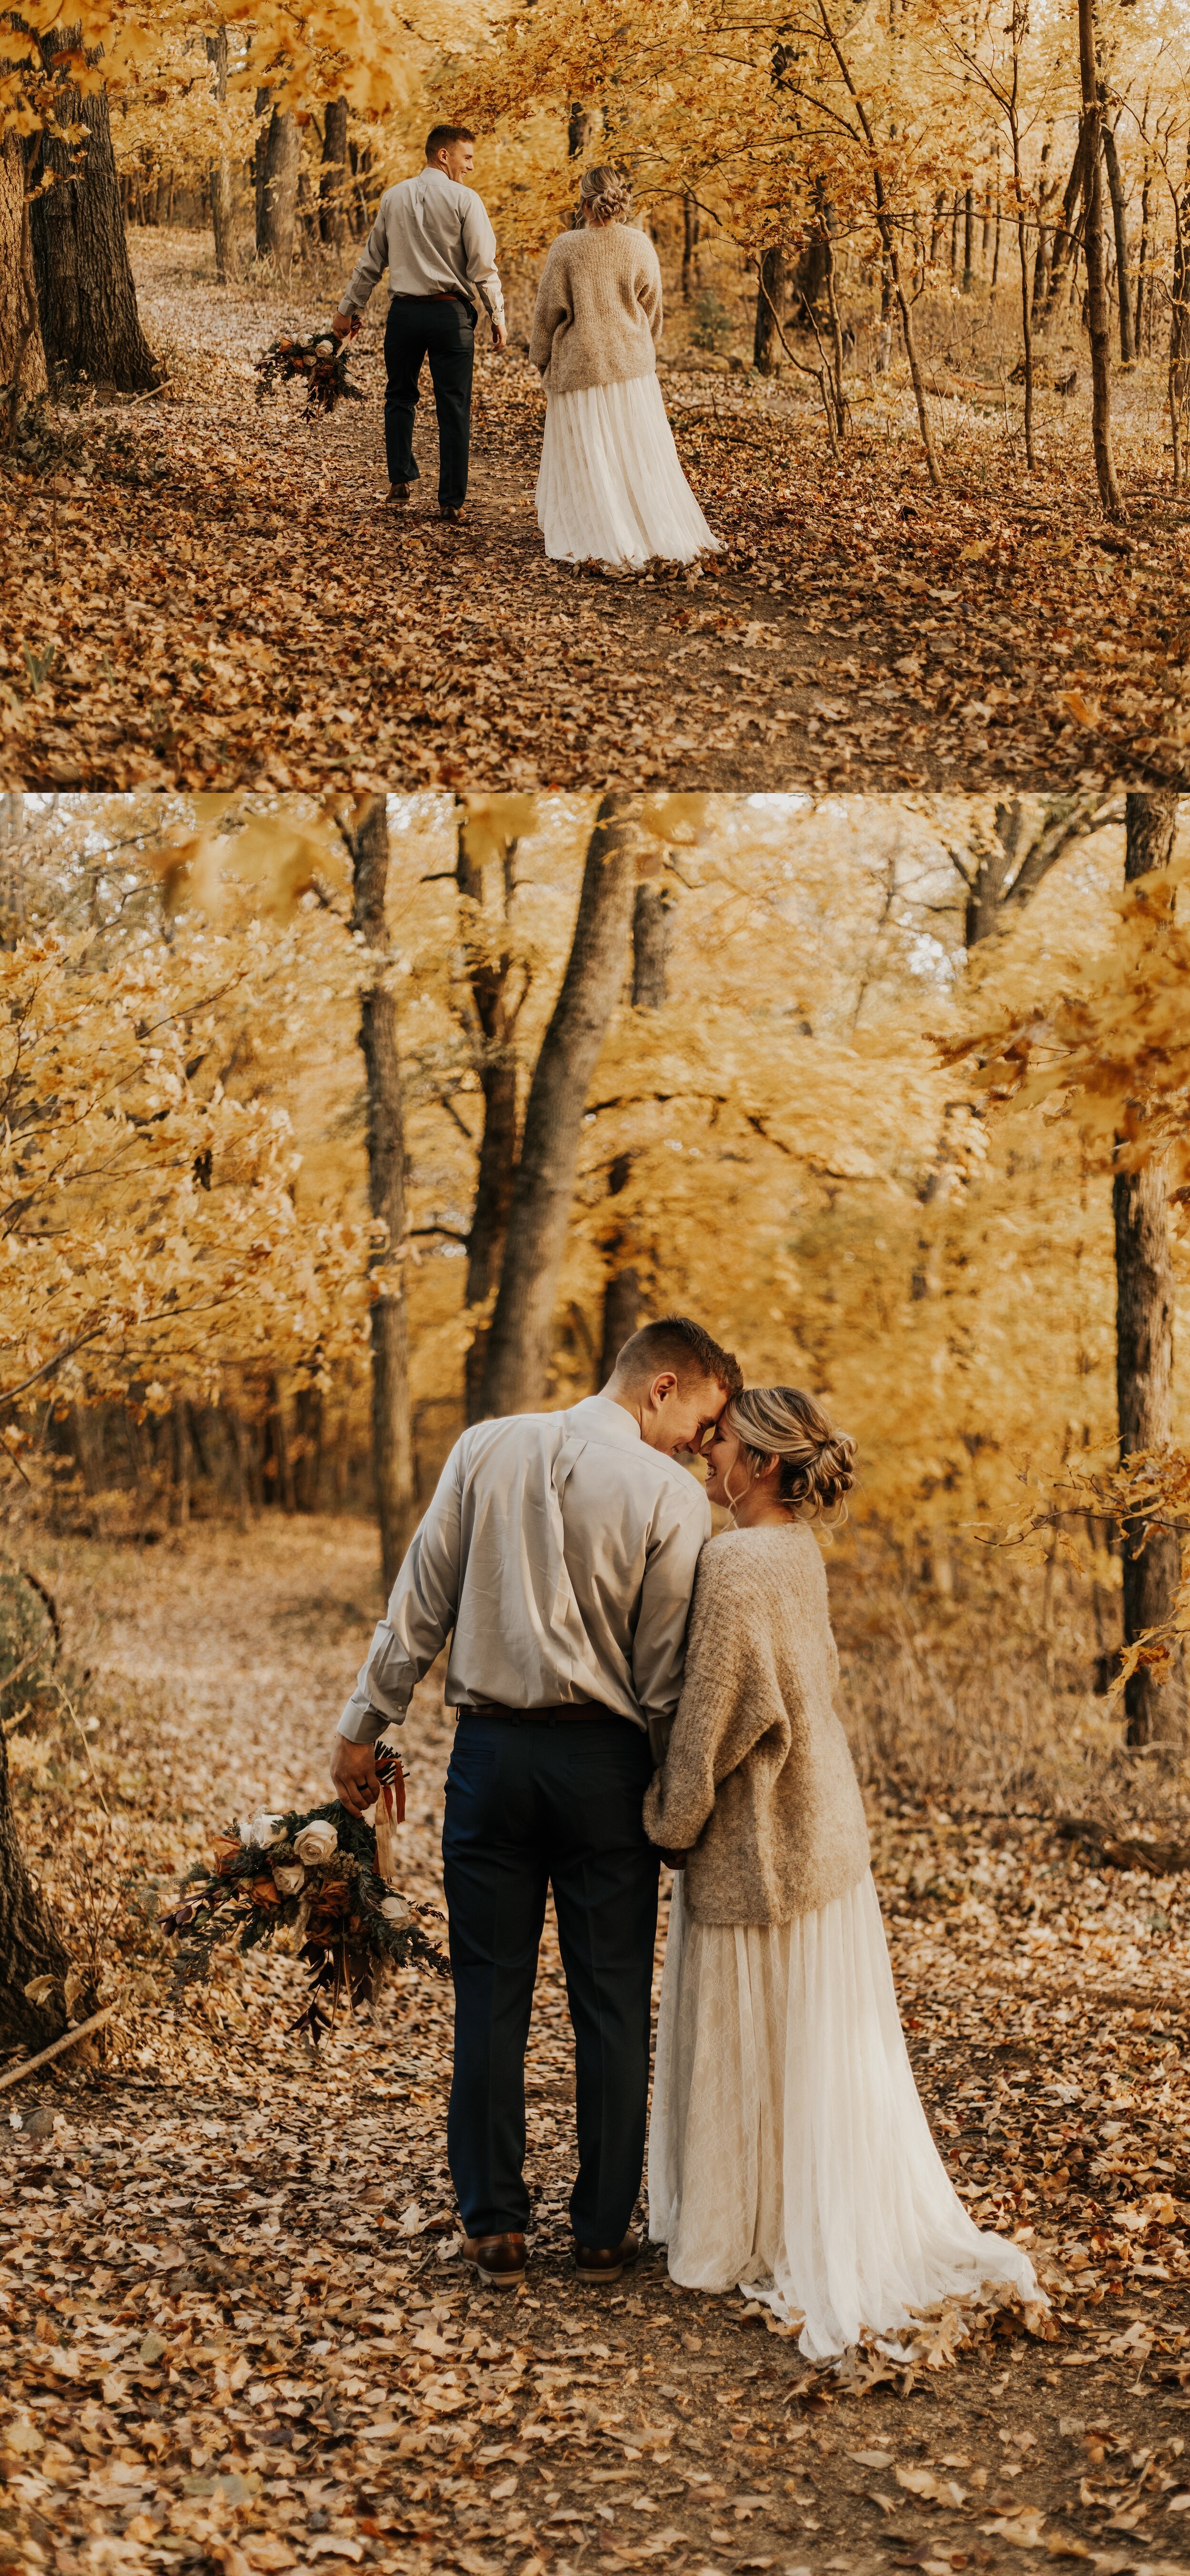 jessika-christine-photography-elopement-couples-outdoor-adventurous-session (18).jpg